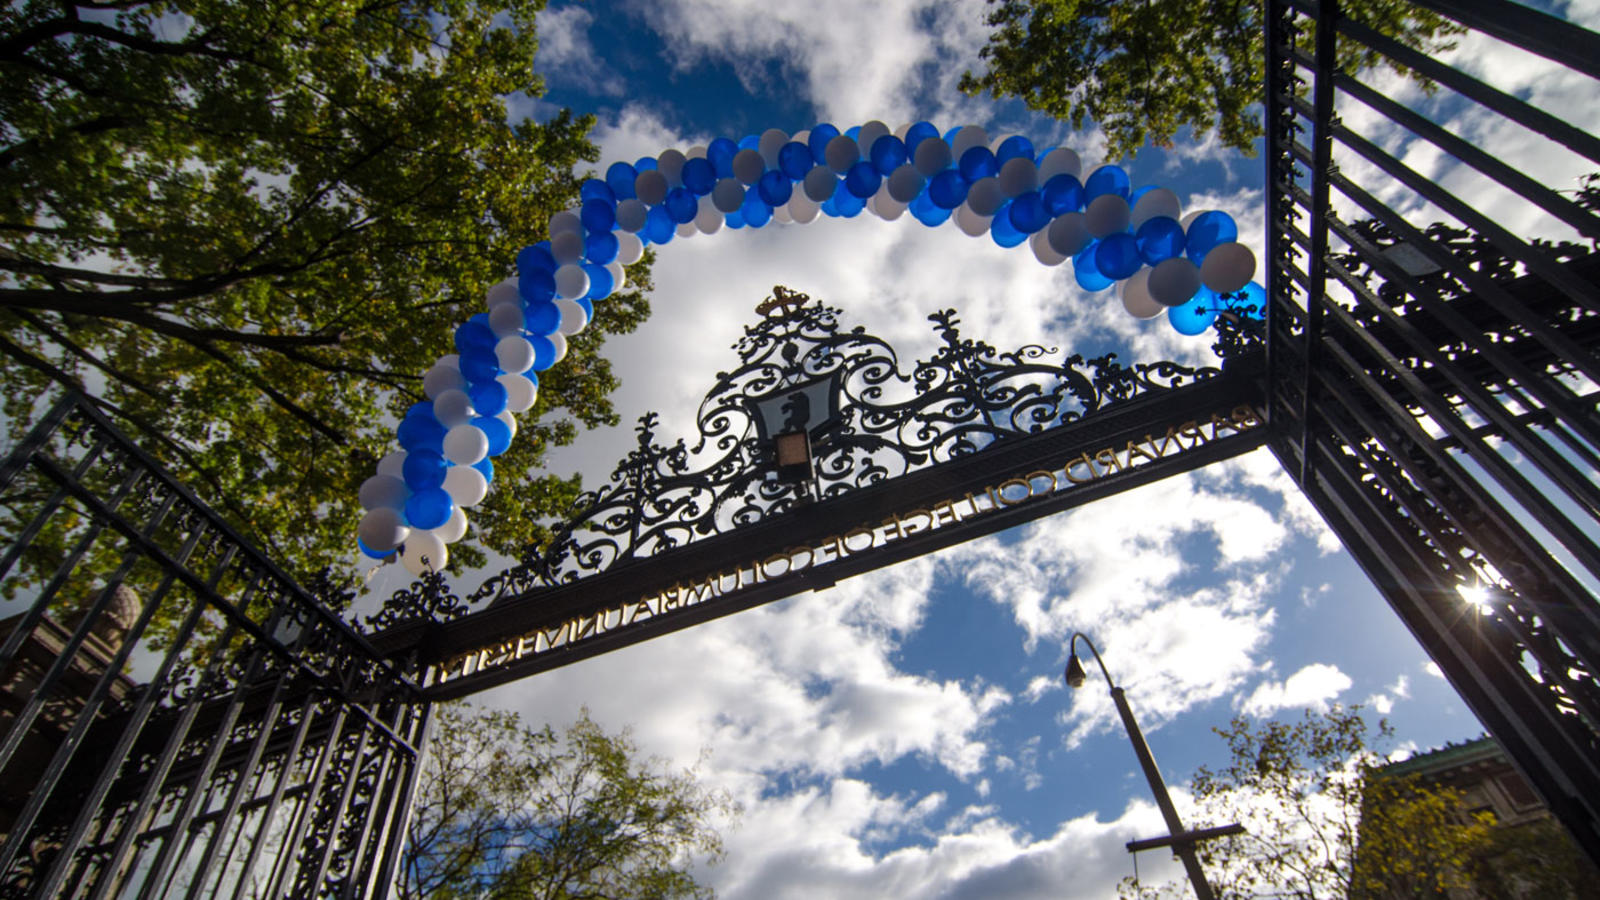 Barnard gate arch covered in white and blue balloons